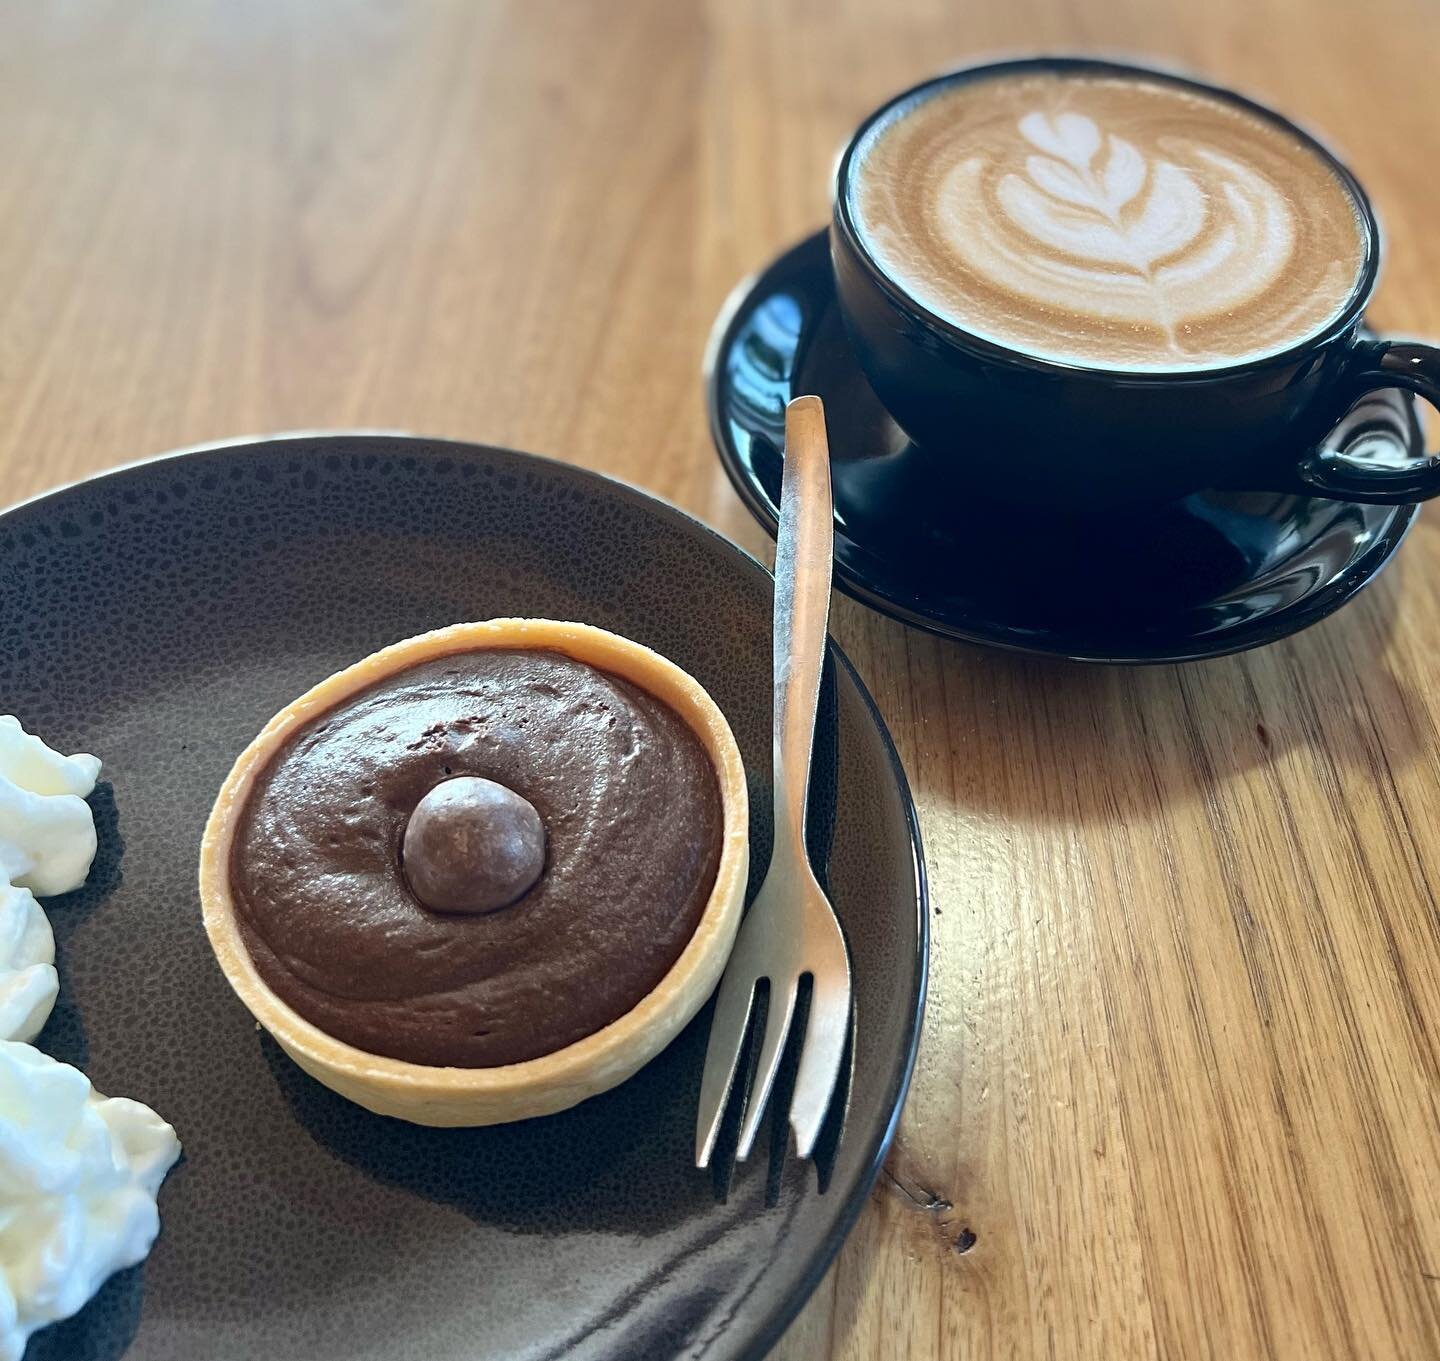 Come in for a one of our scrumptious house made cakes and tarts and a delicious coffee  Open 7 days from 730am-3pm 7 days #holygoatcoffee #housemadecake #eatlocal #supportlocal #shoplocal #barringtoncoast #forster #tuncurry